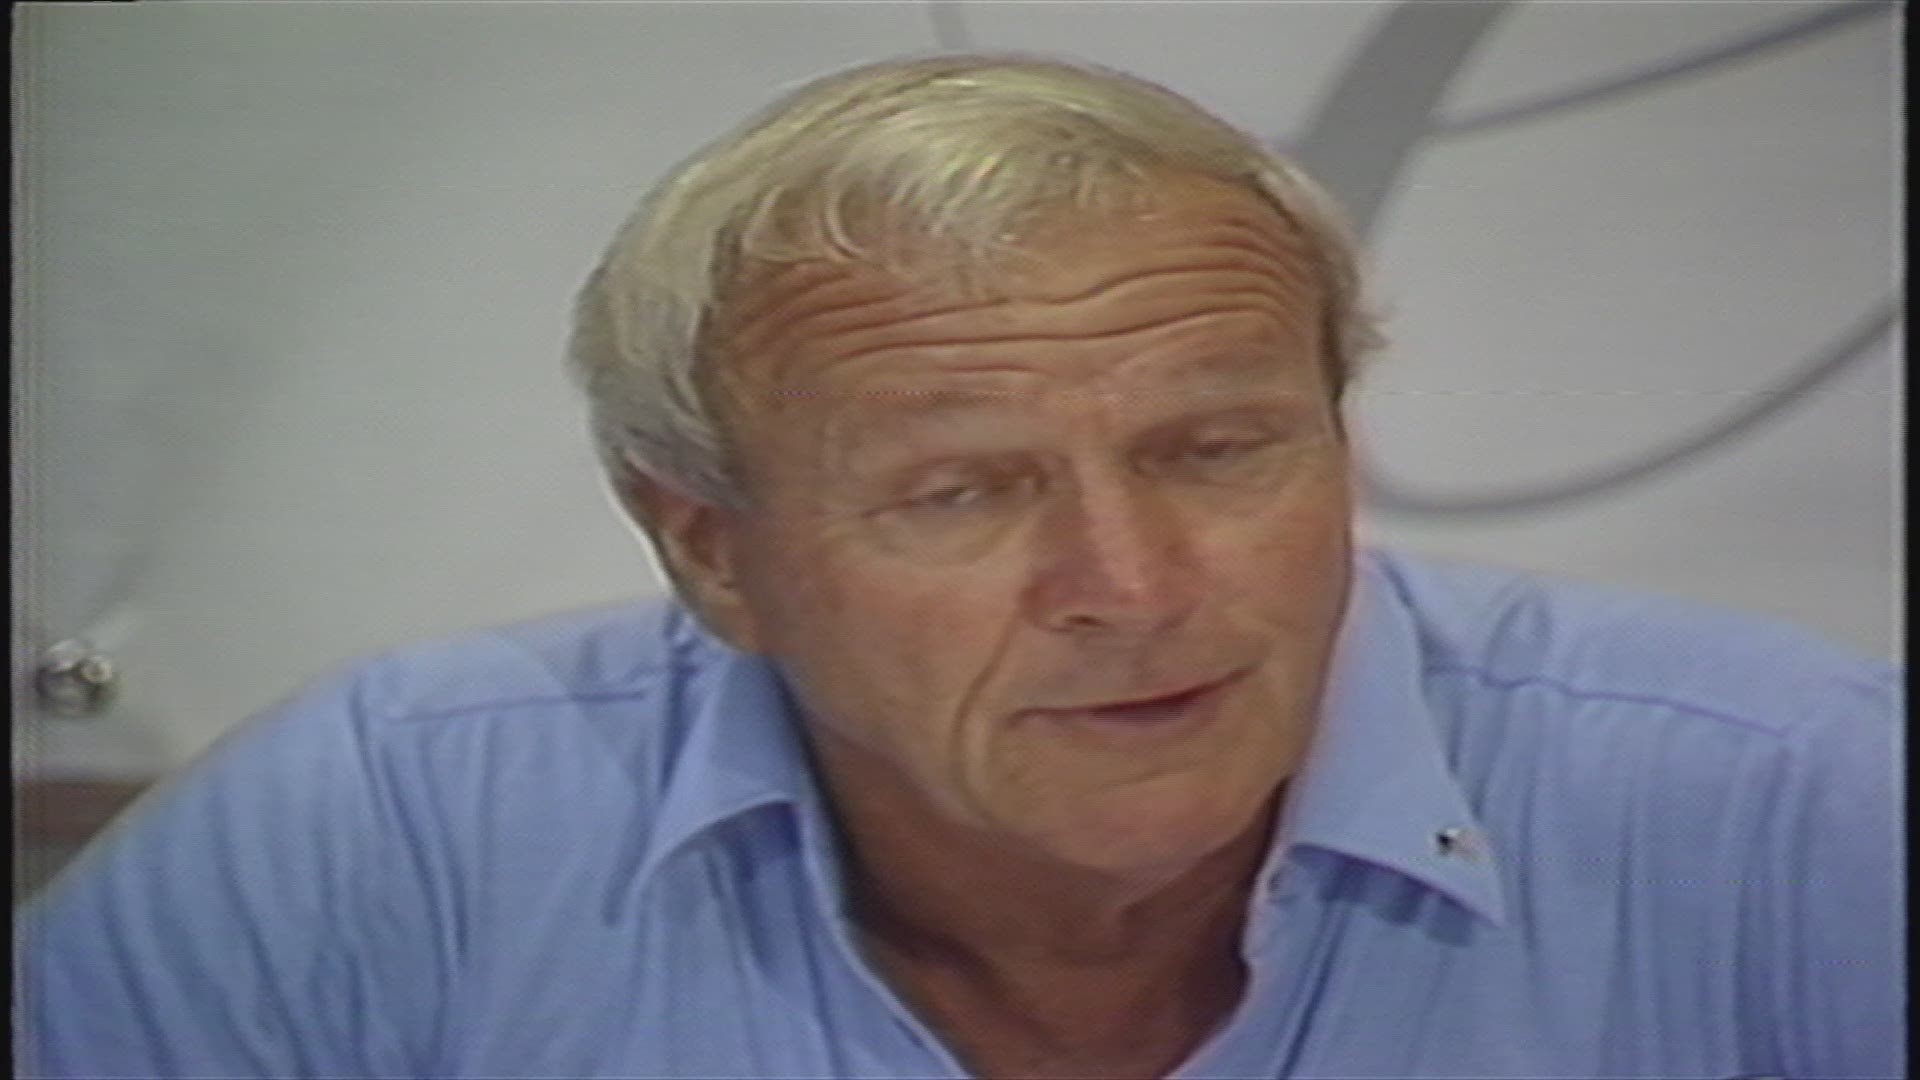 Arnold Palmer was the headliner in Grand Rapids during the 1991 First of America Classic Senior PGA event. Palmer held a news conference the week of the 1991 event. This is a portion of what he said to the Grand Rapids' media 25 years ago.